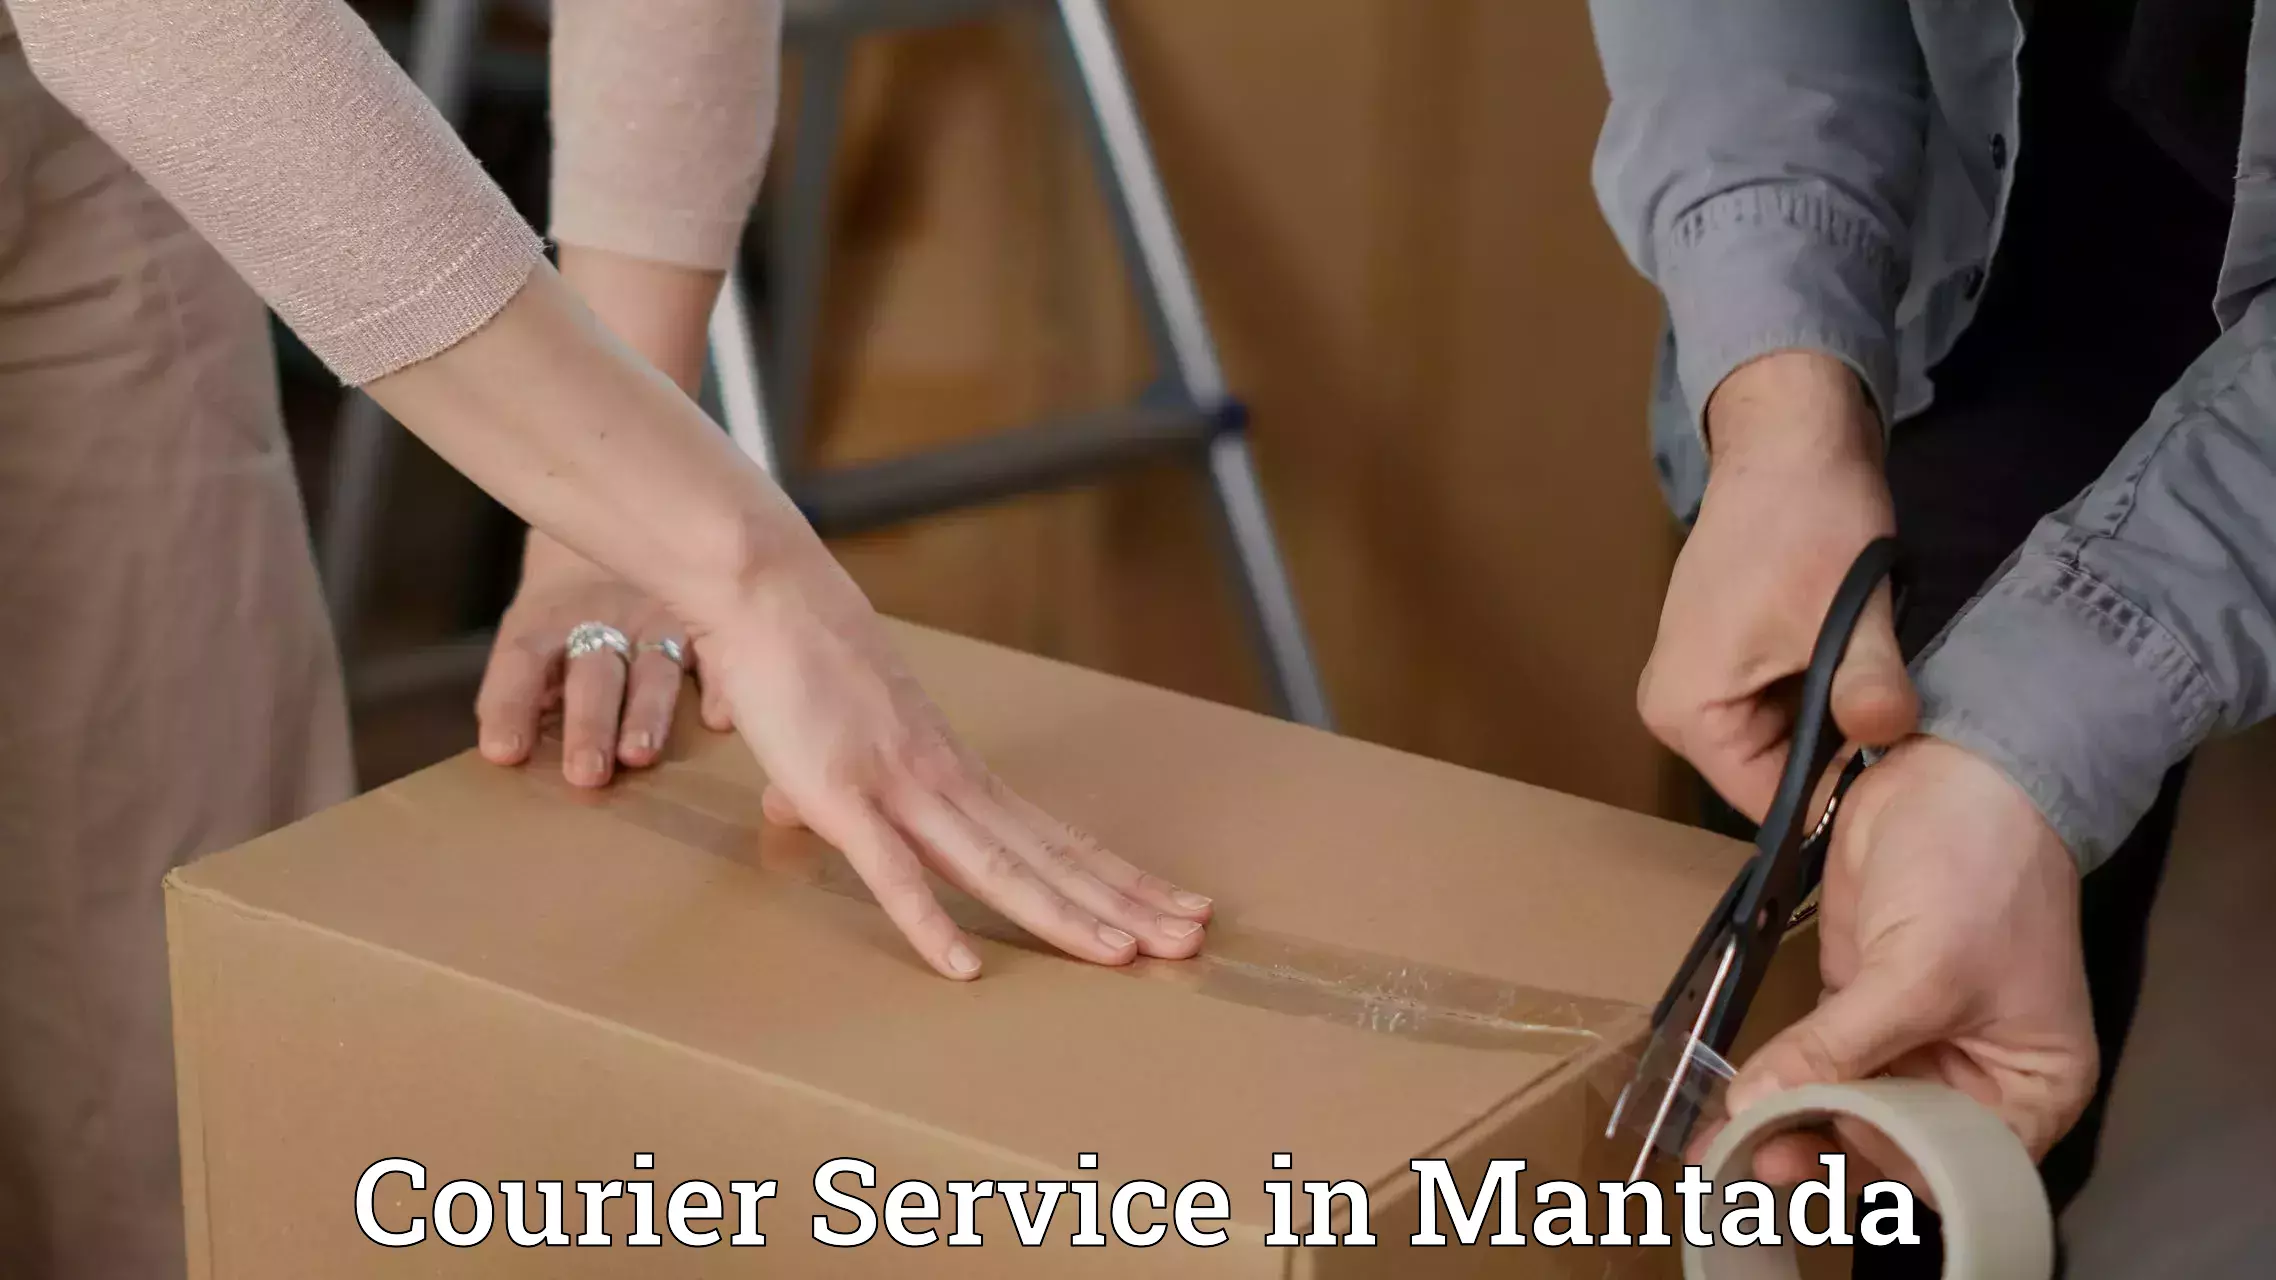 Parcel service for businesses in Mantada